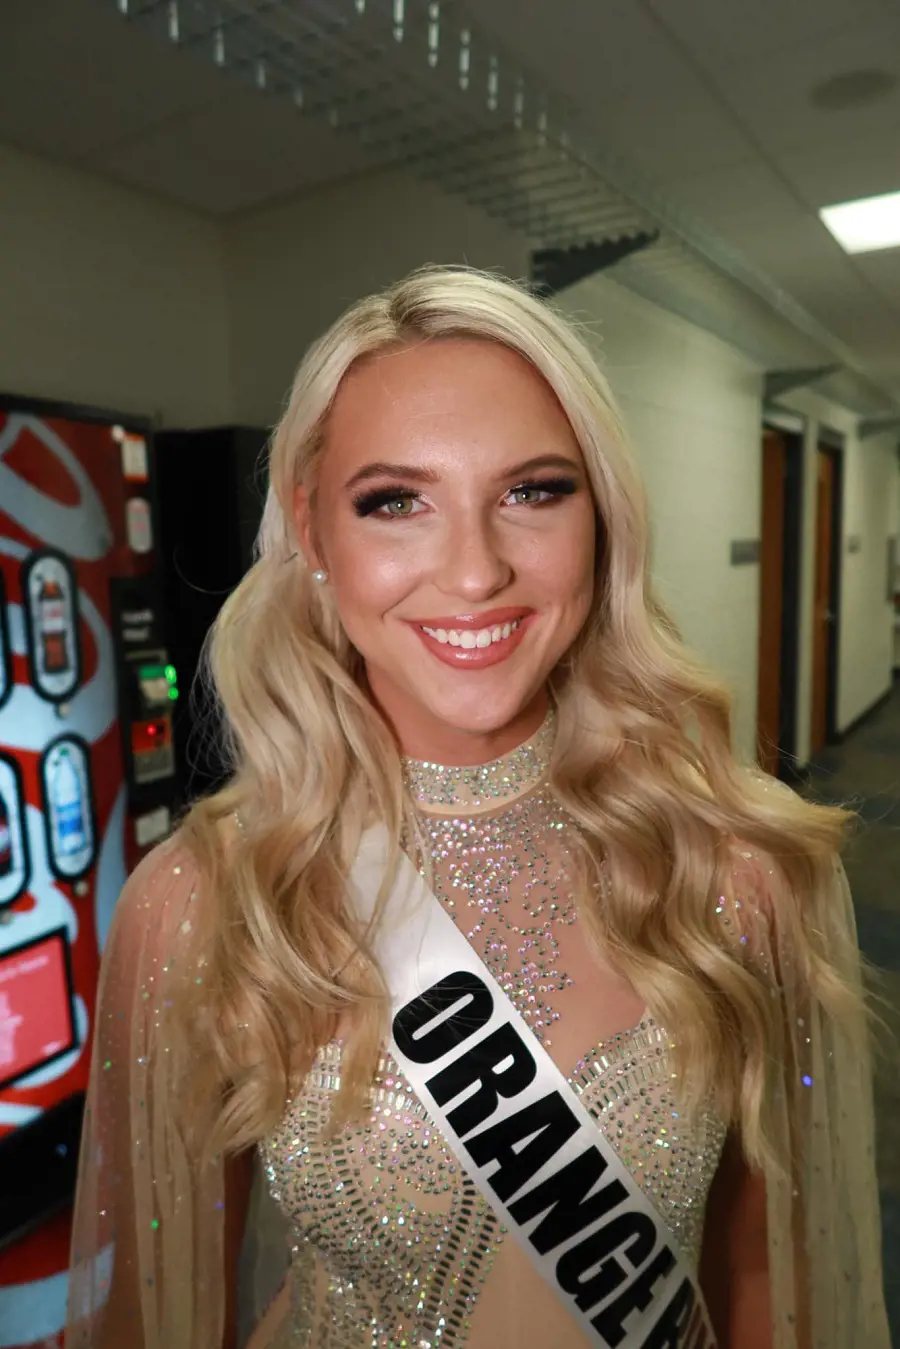 Holliday Bama Rush competed in Miss Alabama Teen USA 2021 and held the title as Orange Beach